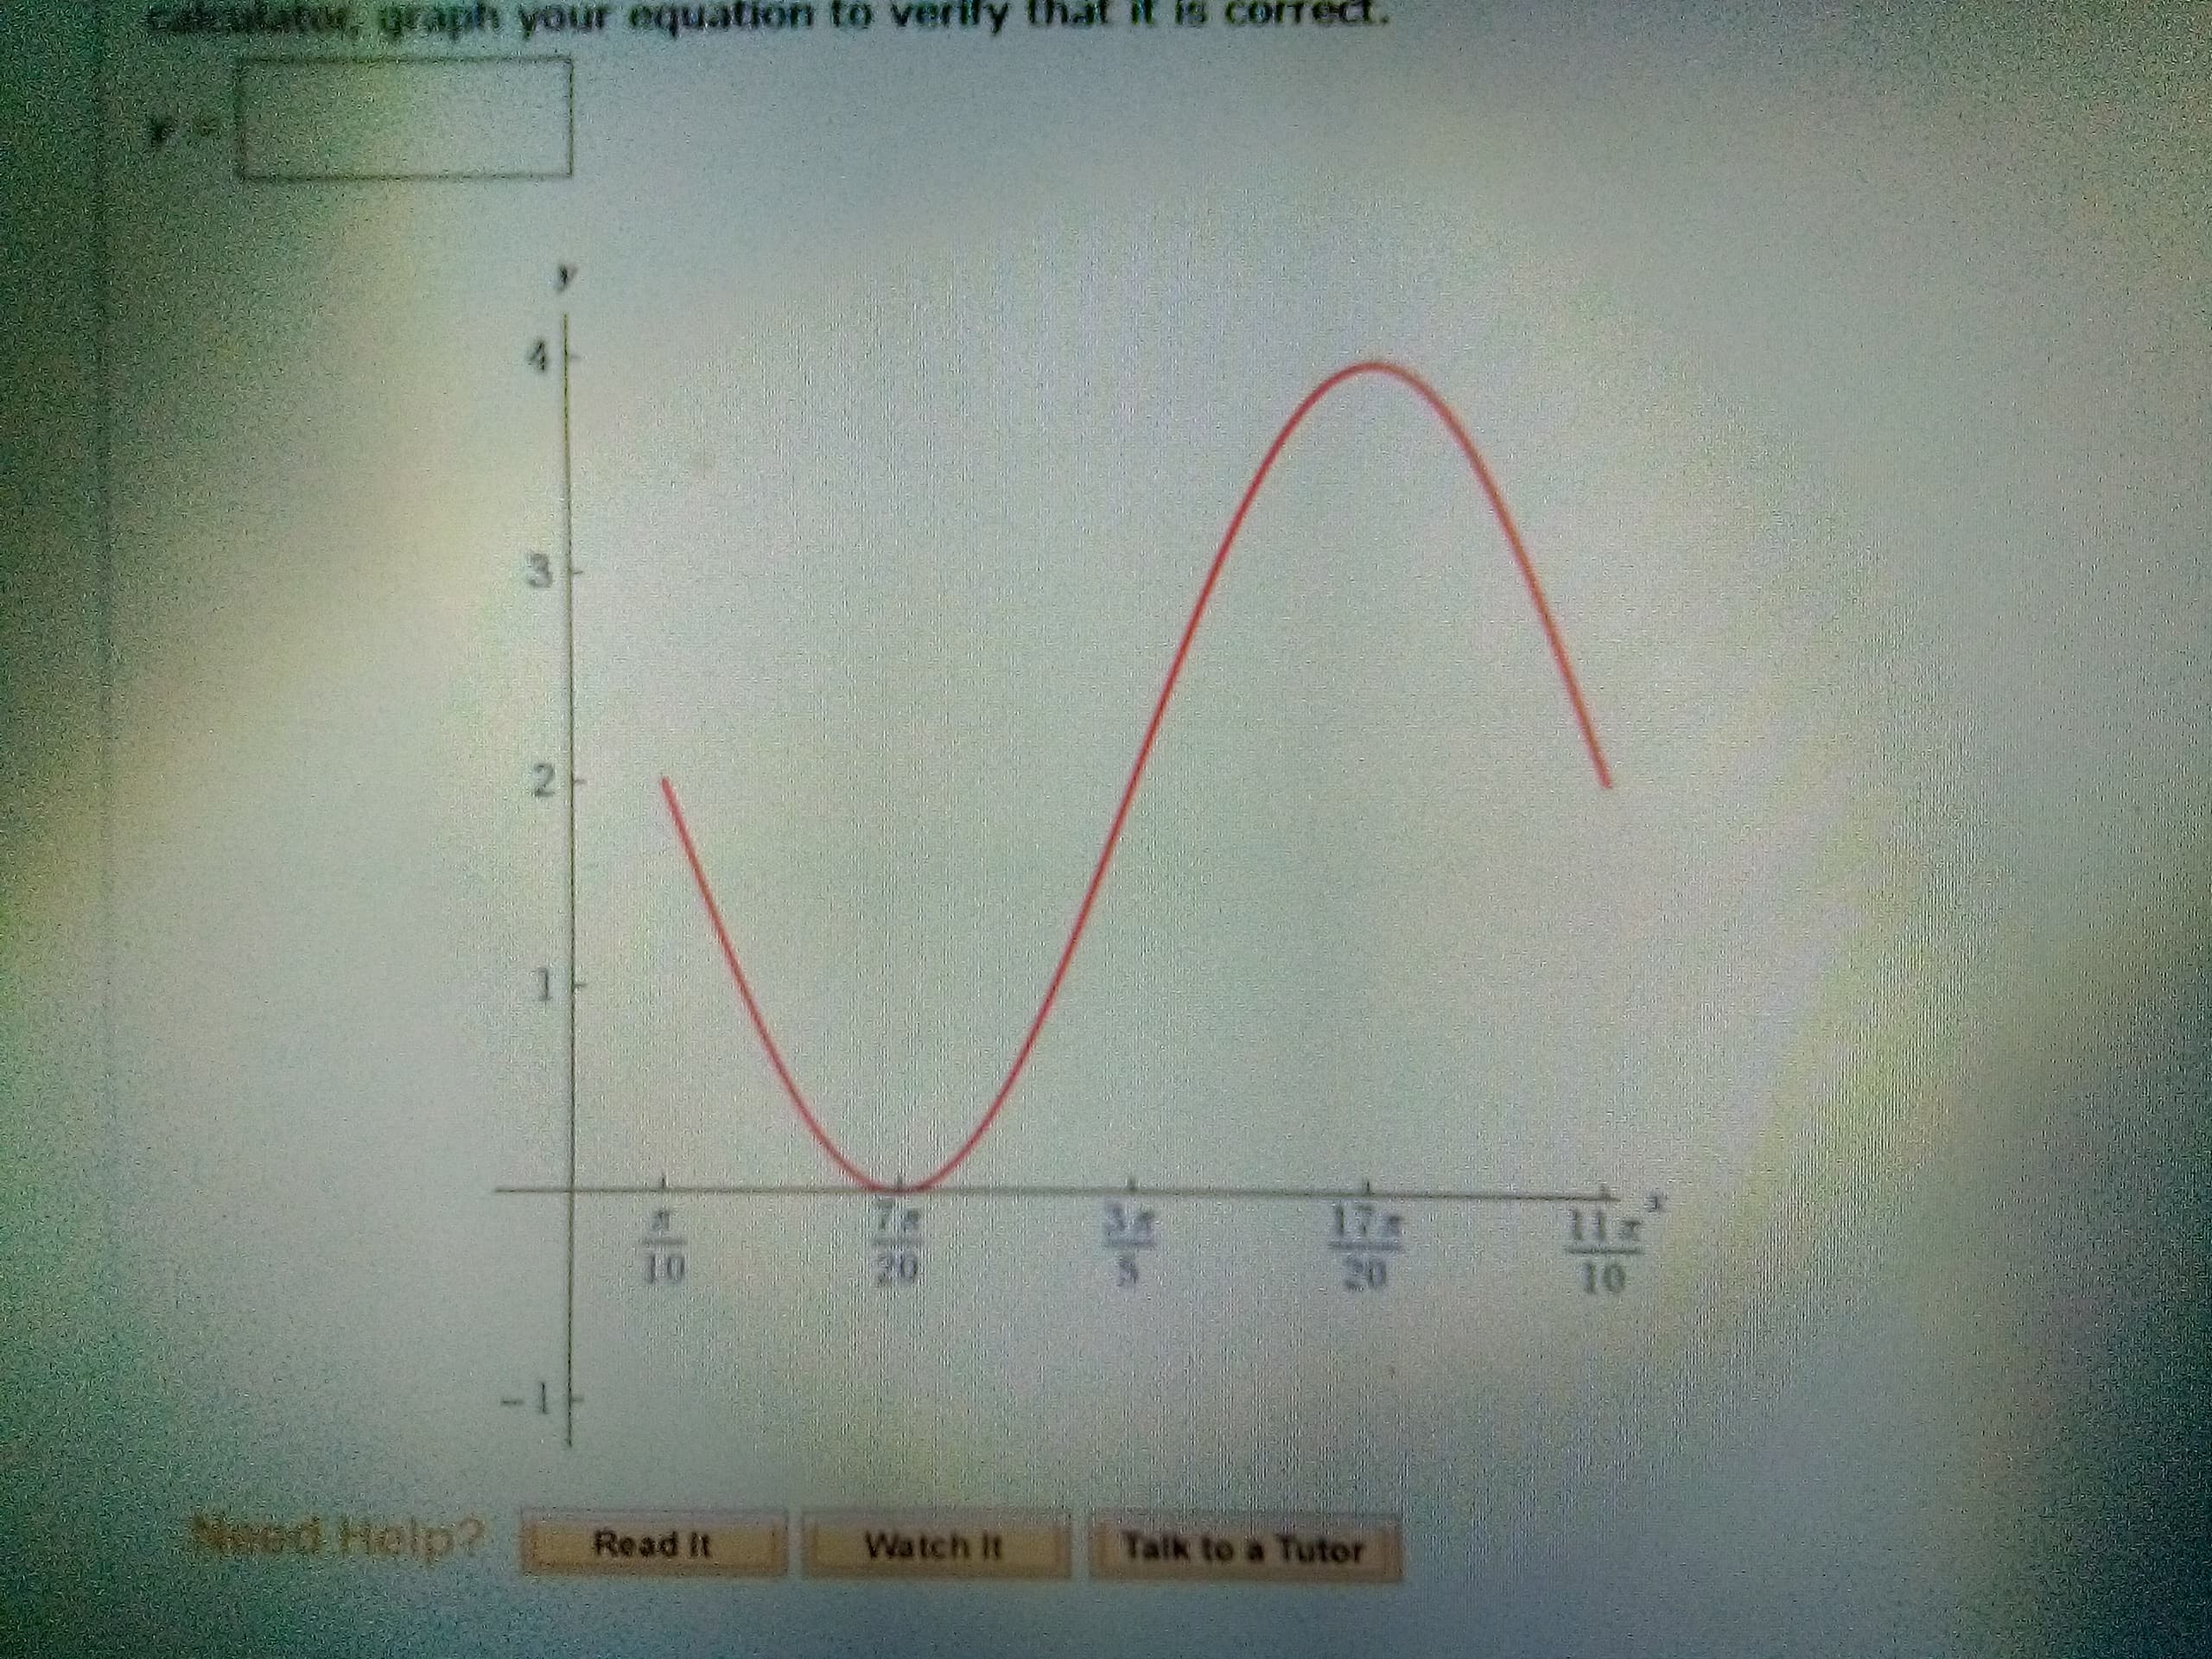 alator, graph your equa
tion to verify
cOIrect.
21
10
20
20
10
Need Help?
Read It
Watch It
Talk to a Tutor
